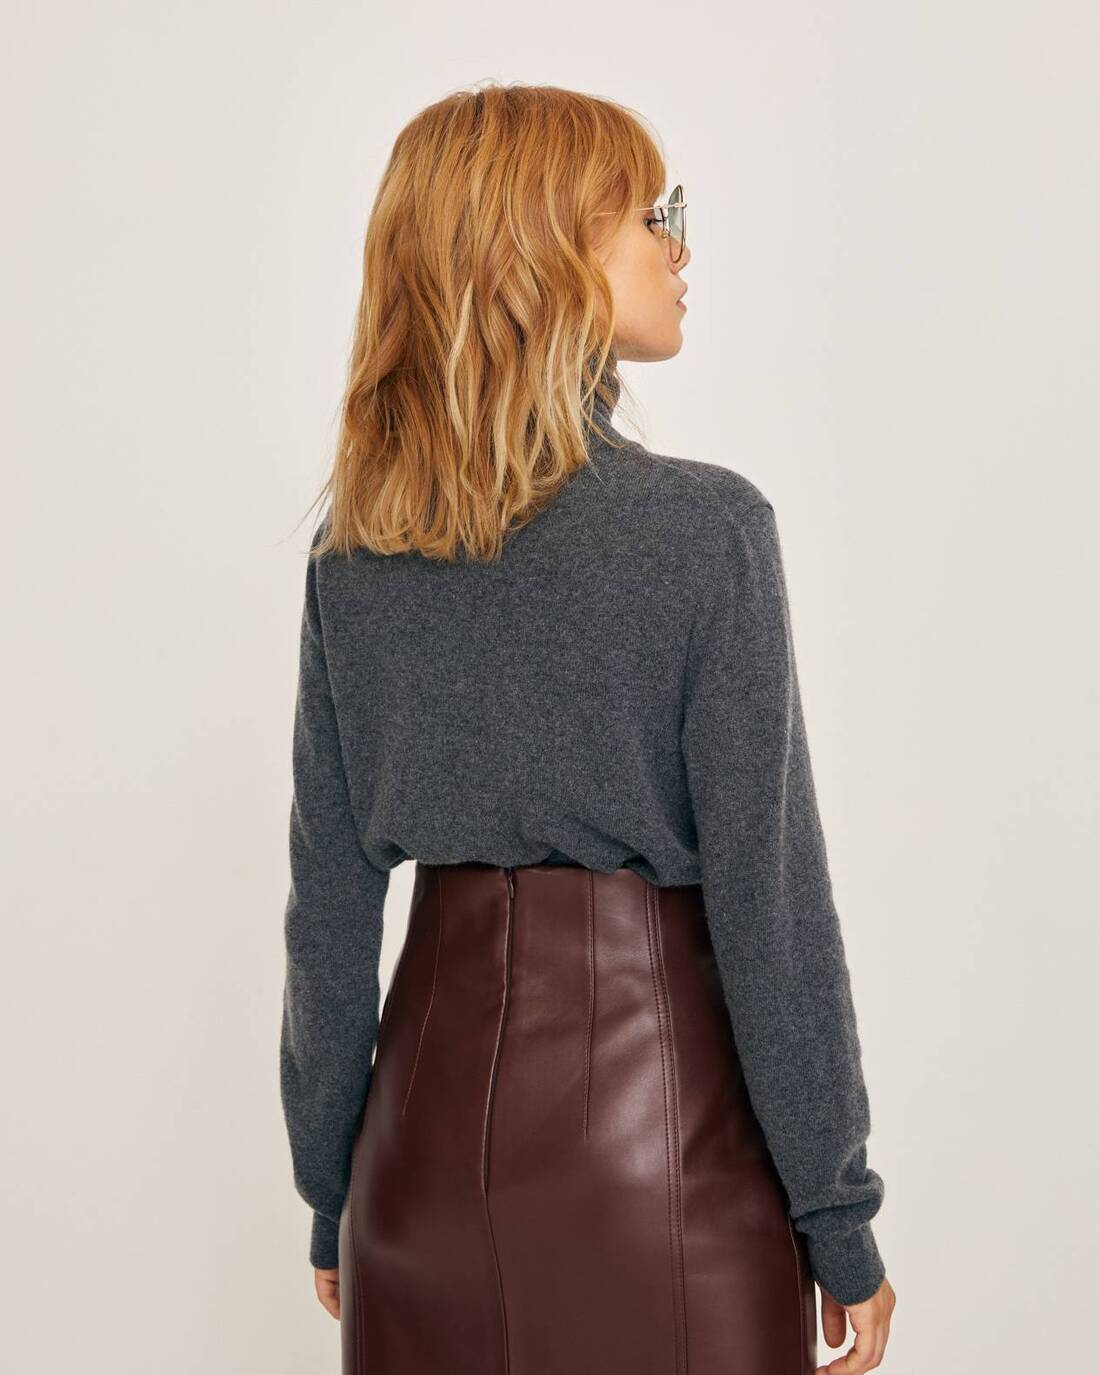 Loose-fit sweater with standing collar